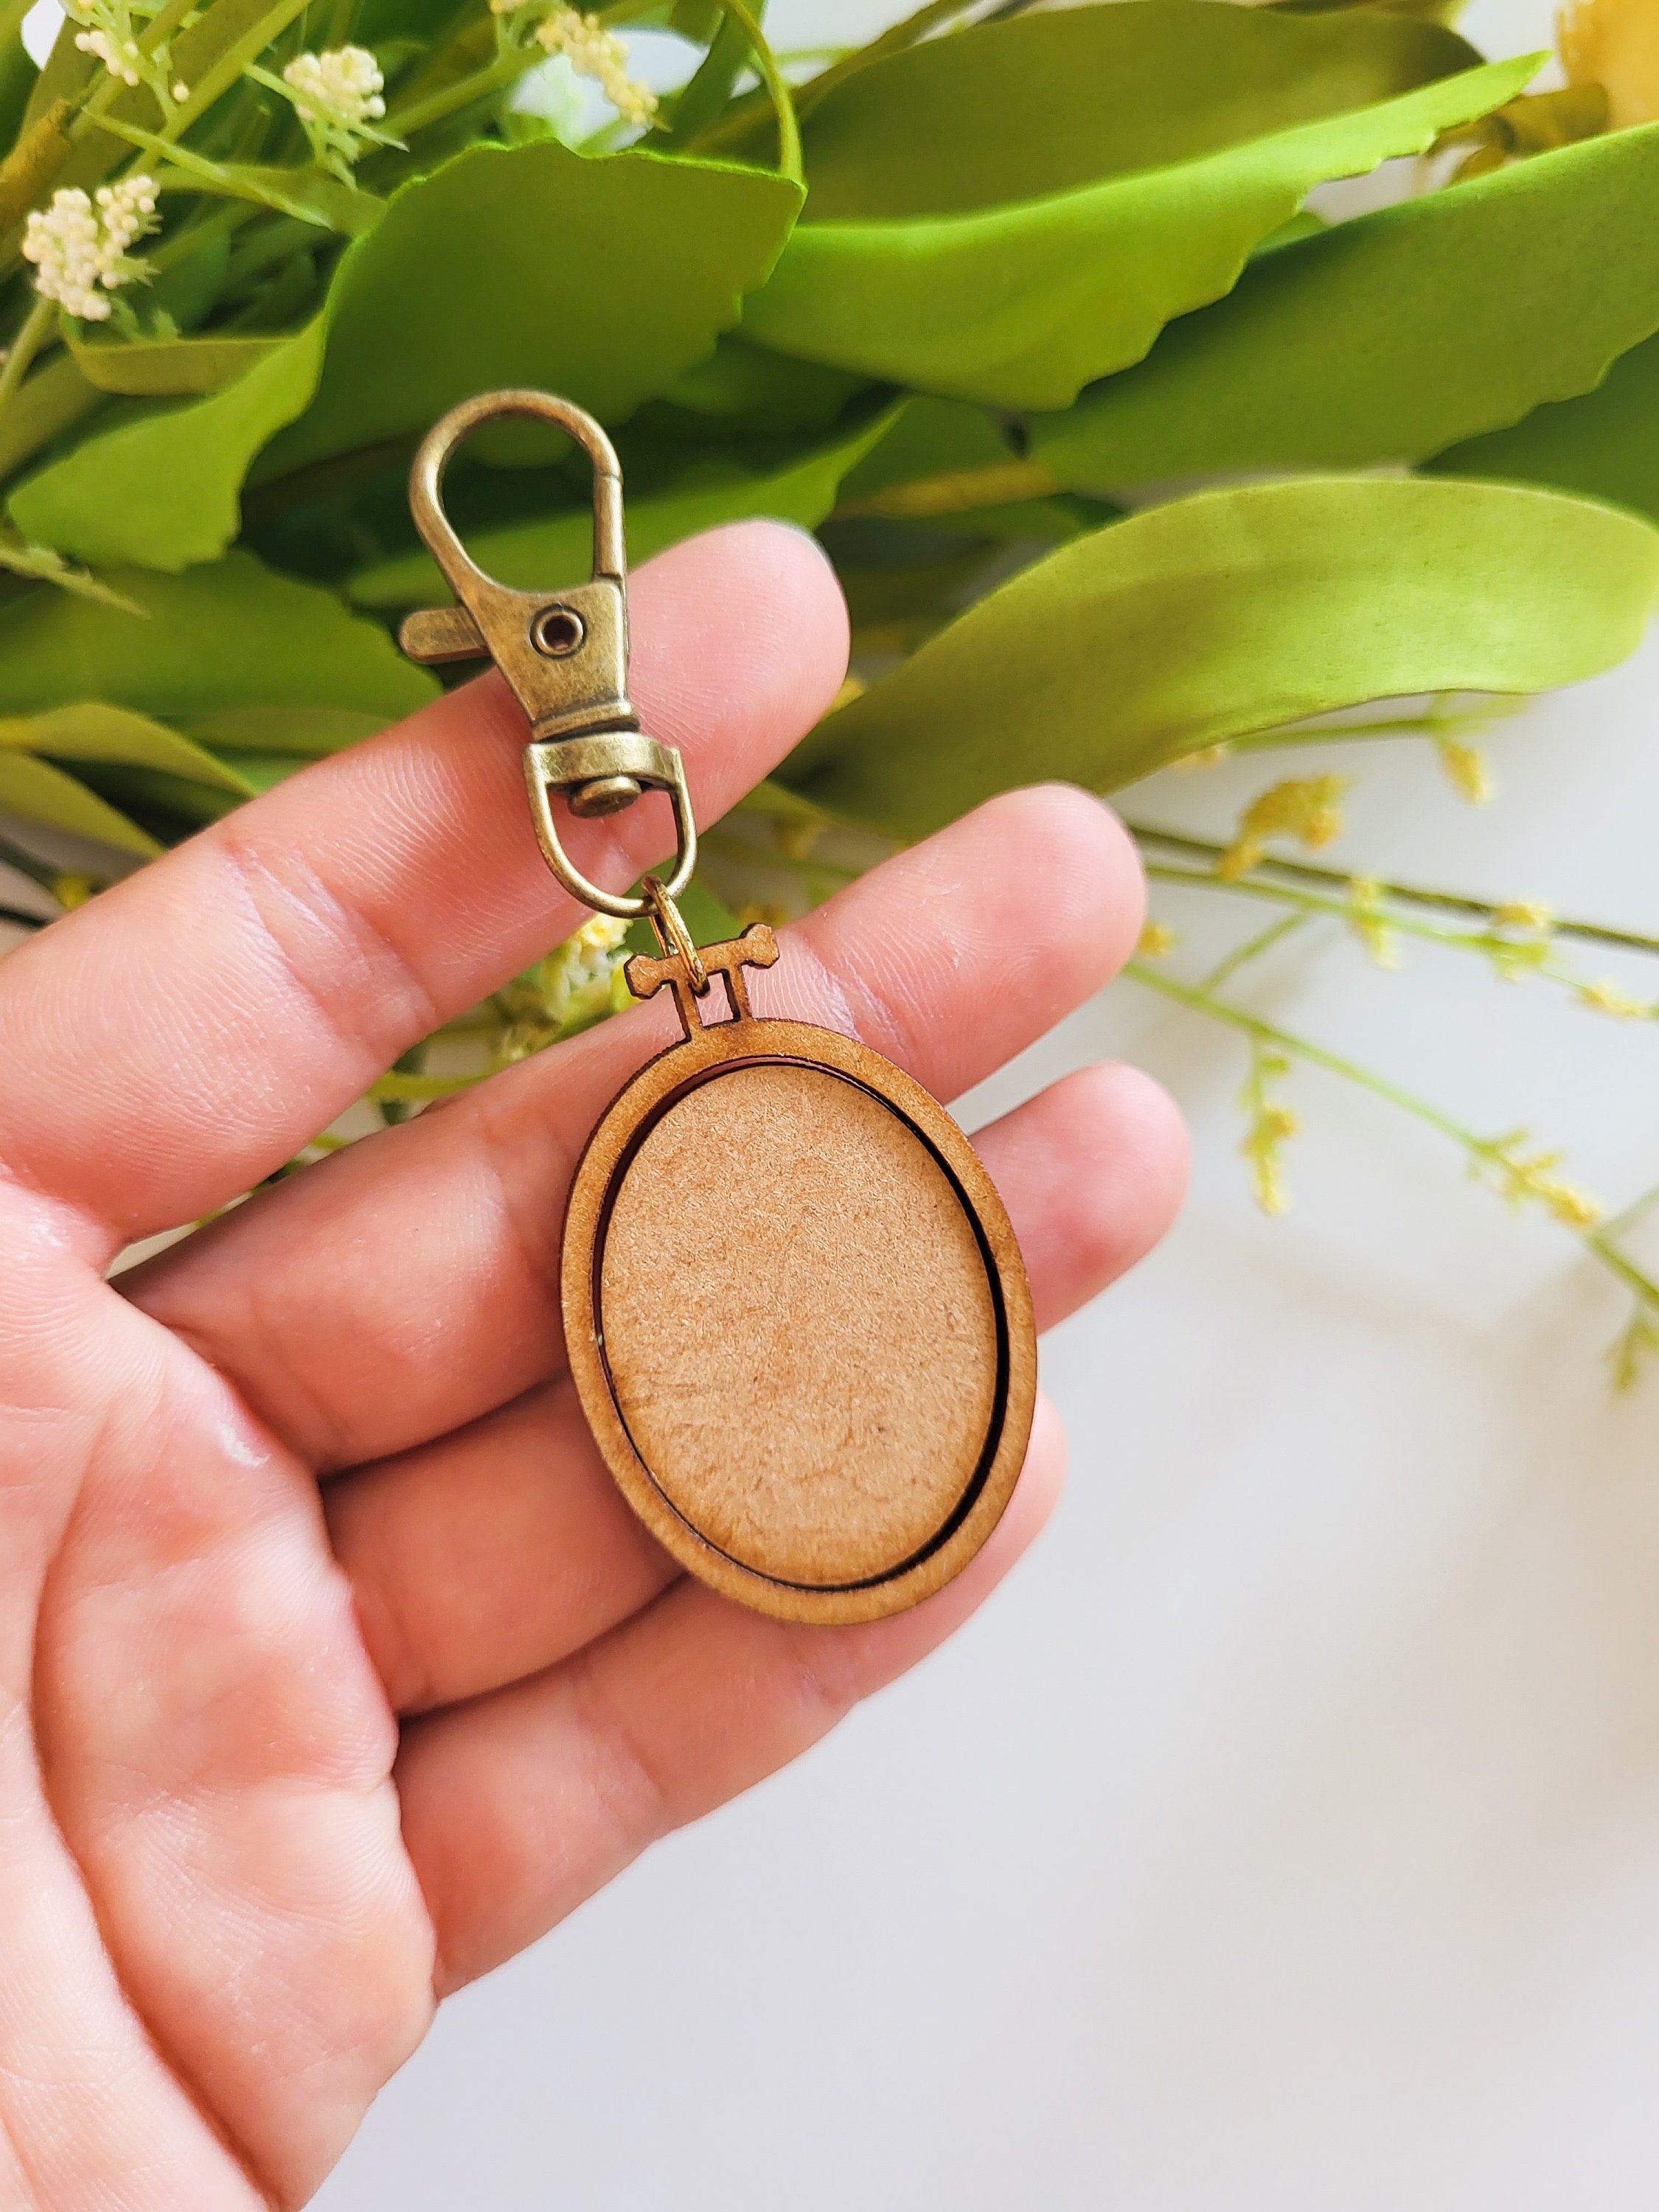 3x Mini Wooden Embroidery Keychain Hoops With Backing, Hoop for Cross  Stitch, Small Hoops, Mini Hoops Pendants, Mini Round Wooden Hoop 